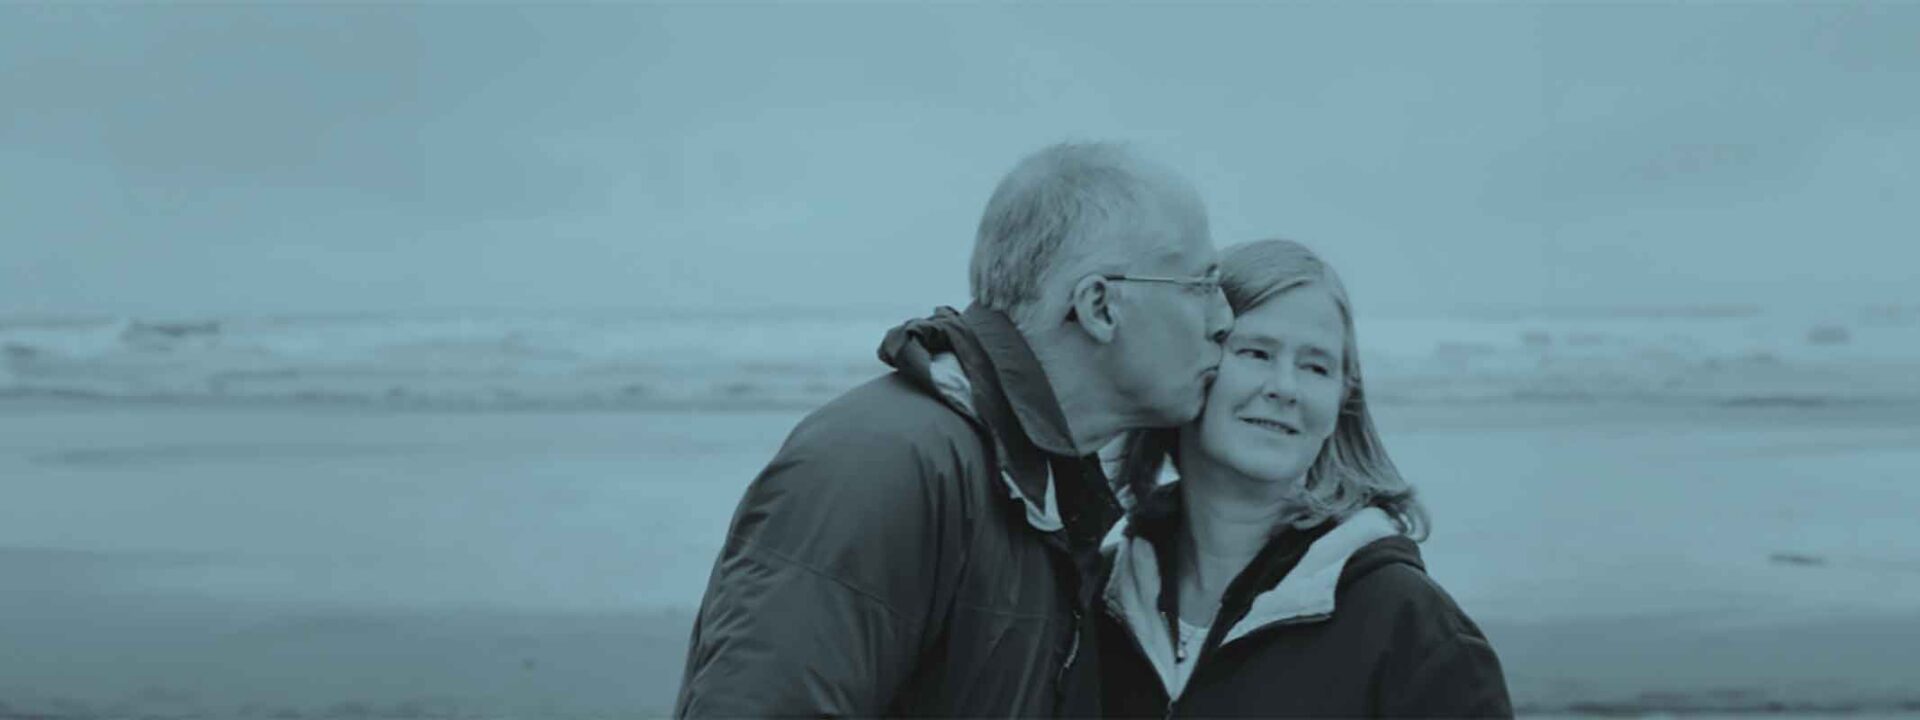 The image displays a couple embracing with one person kissing the other's forehead. They are by the sea with a vast, overcast sky.